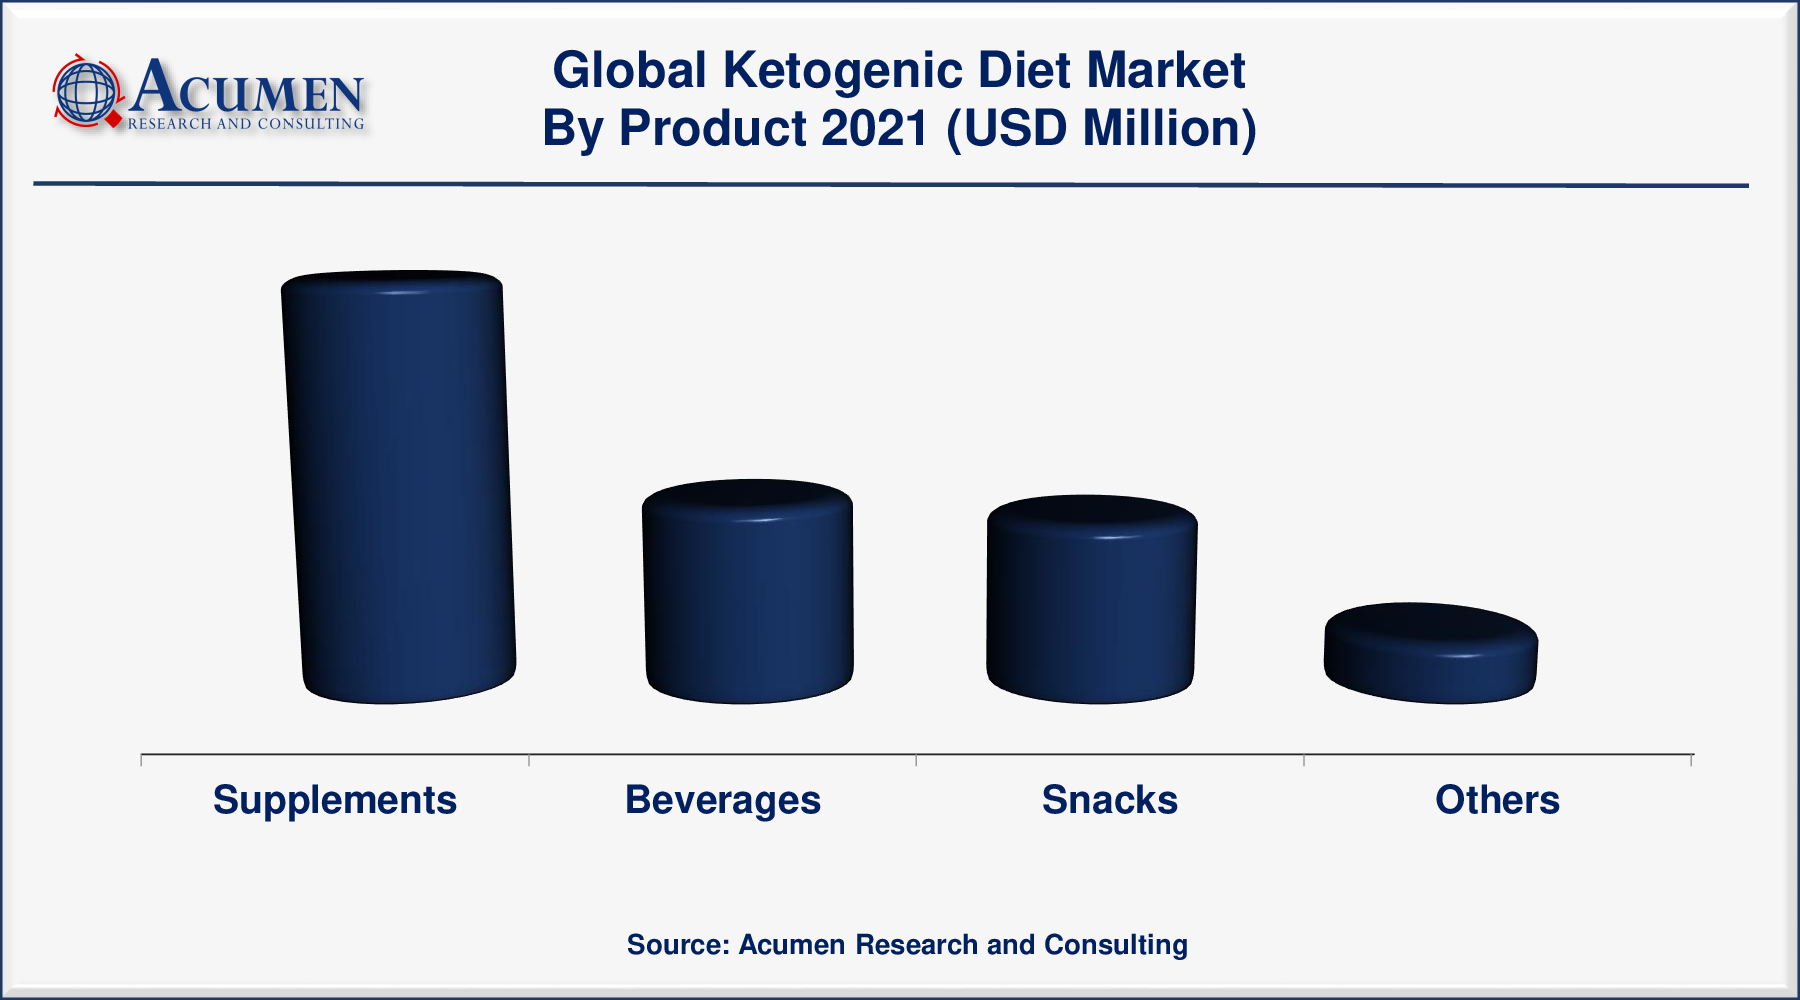 Ketogenic Diet Market Share was valued at USD 10,198 Million in 2021 and is predicted to be worth USD 16,064 Million by 2030, with a CAGR of 5.4% from 2022 to 2030.